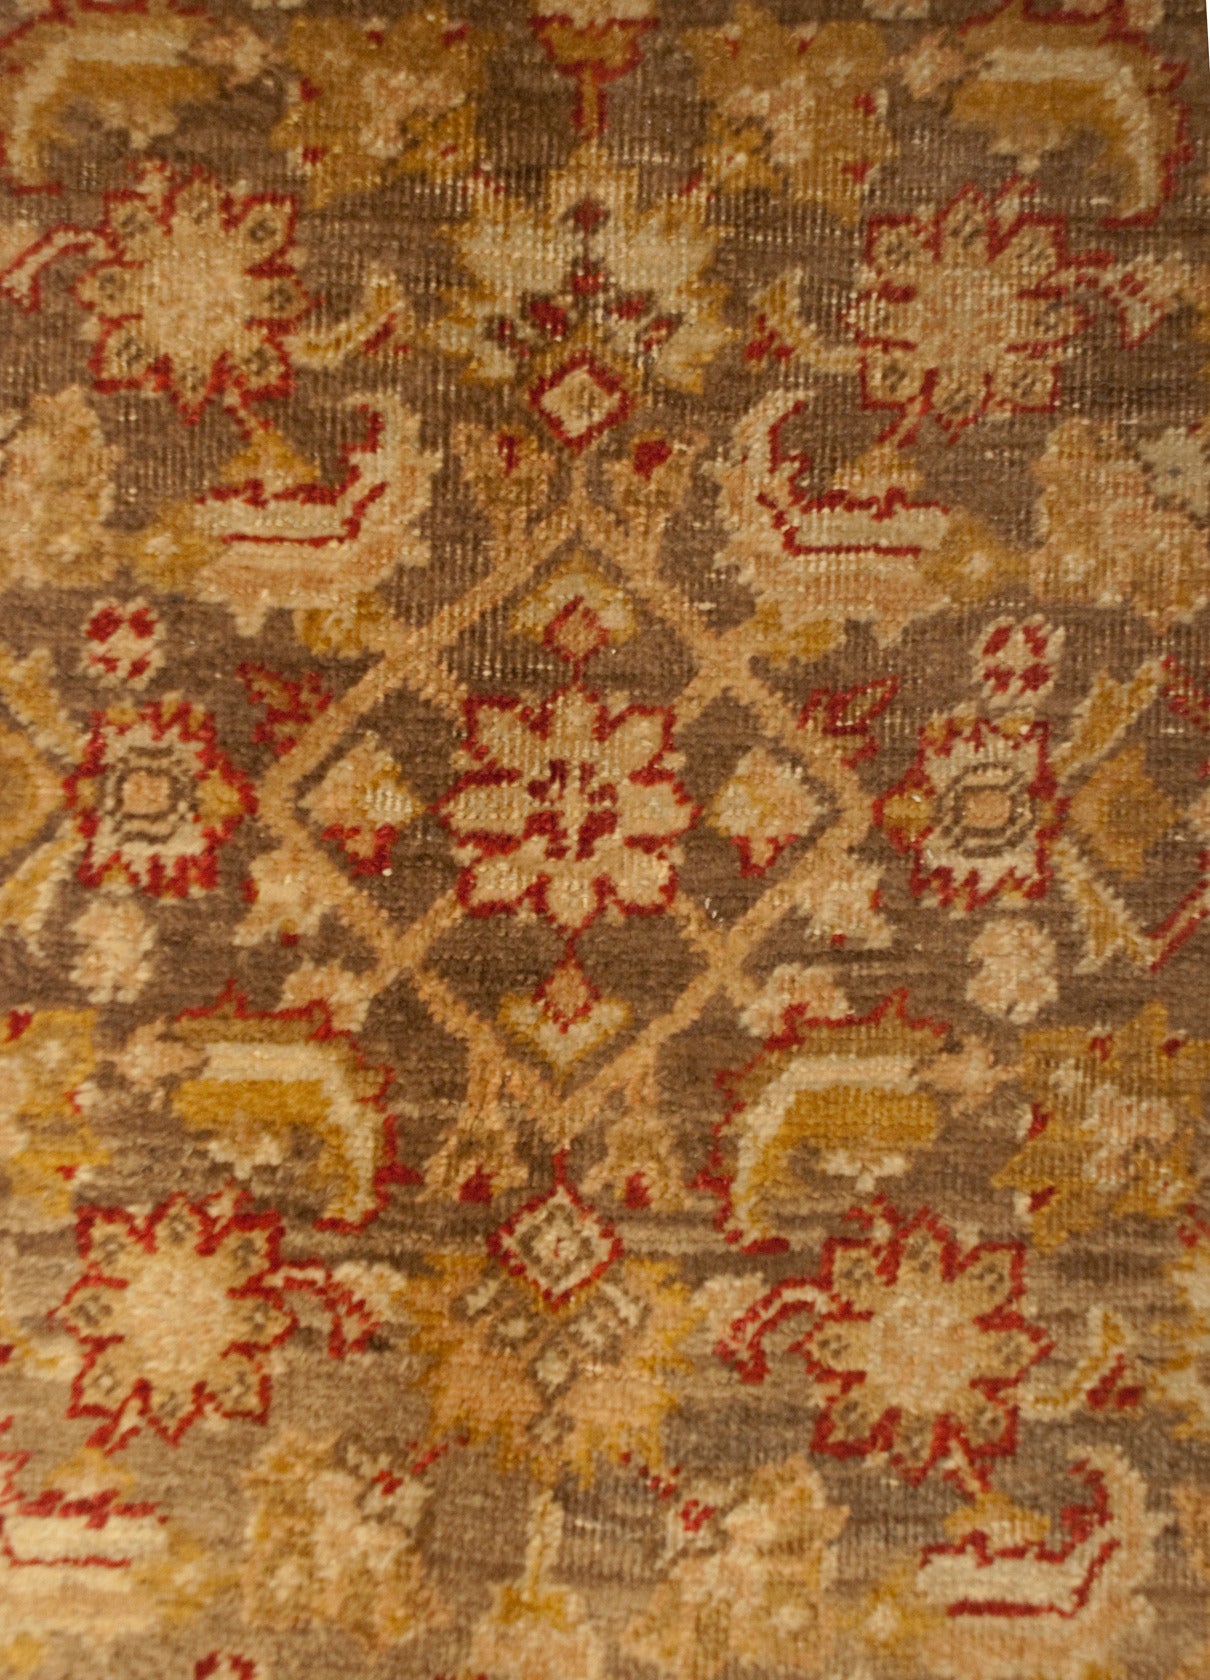 An early 20th century Persian Tabriz rug with a wonderful crimson, gold, and cream floral lattice pattern on a natural, undyed wool, background surrounded by a beautiful crimson and floral border.